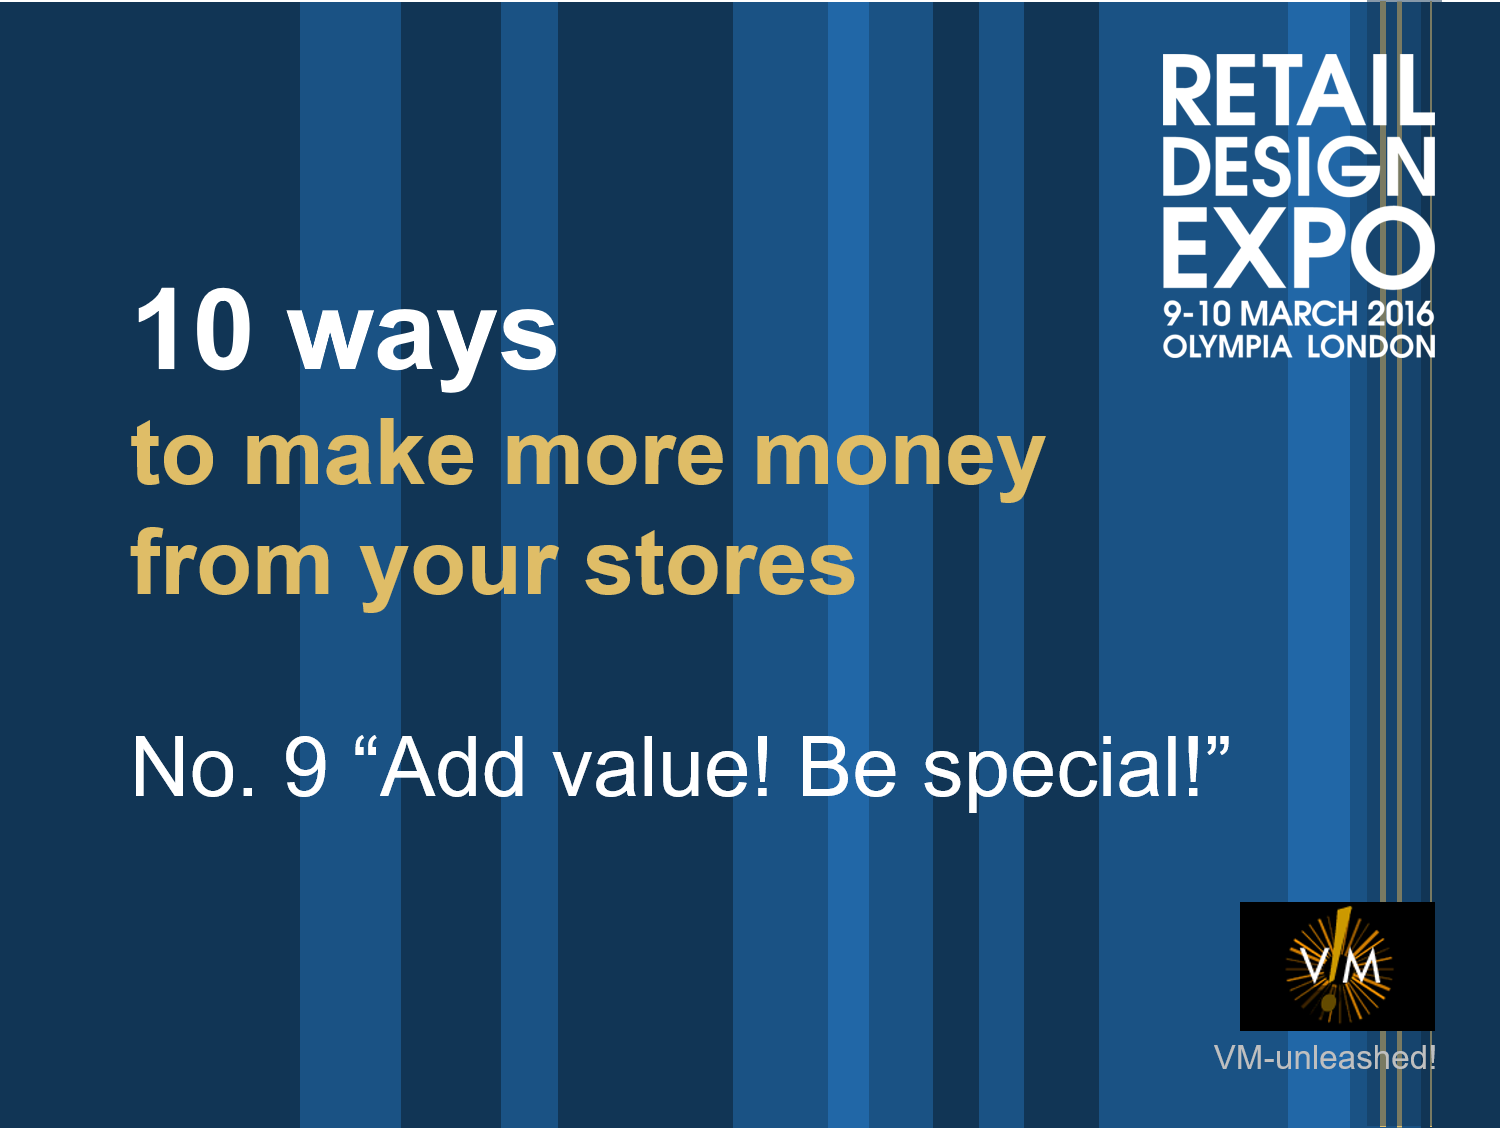 retaildesignexpo-add-value-be-special.png